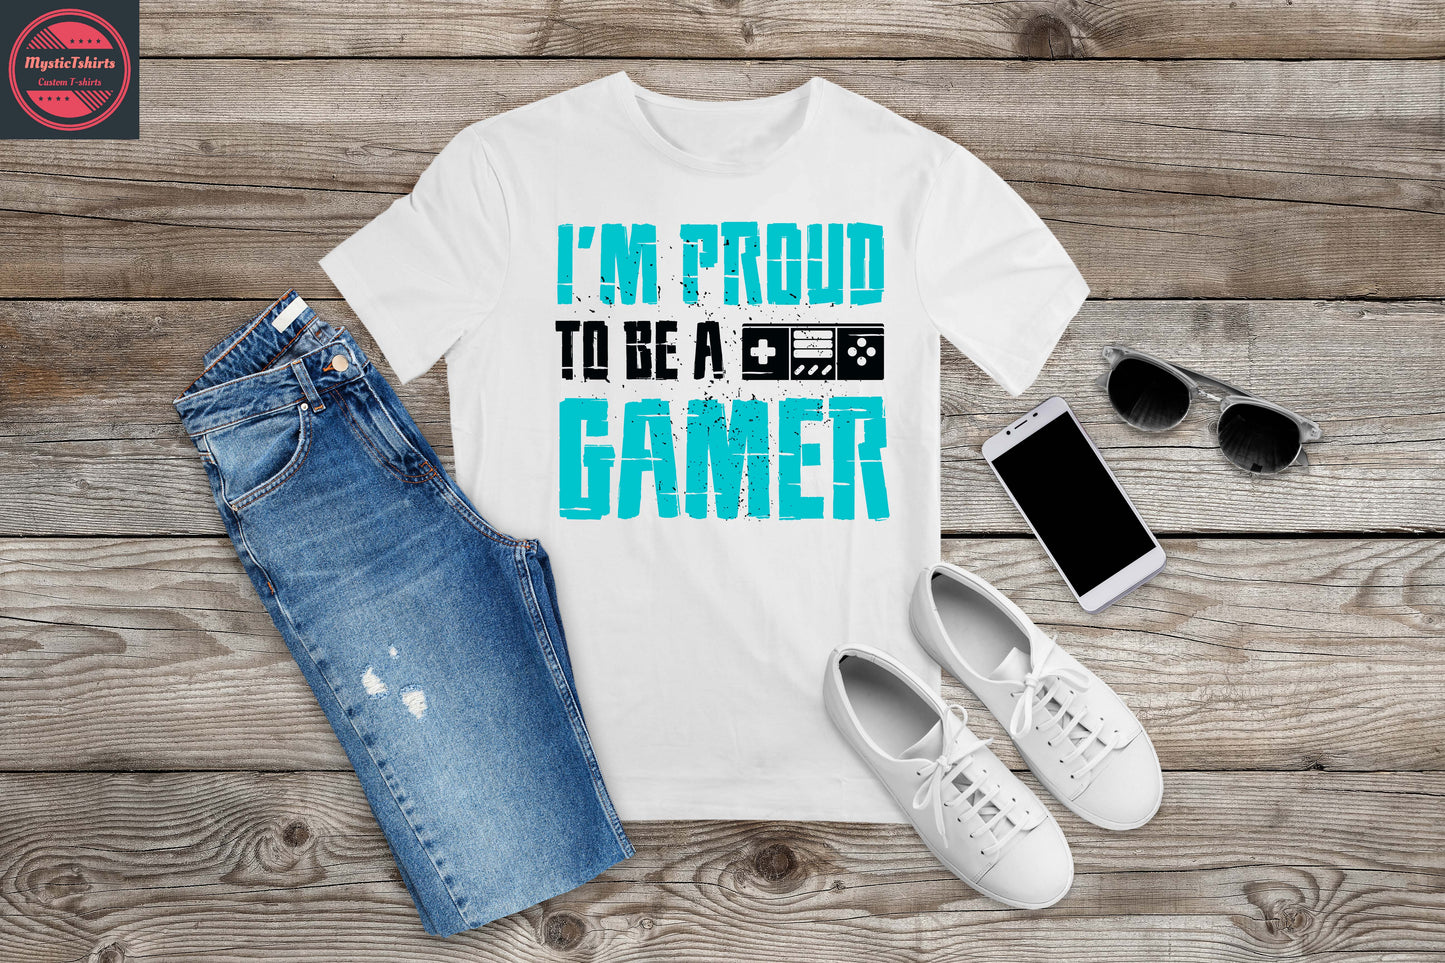 232. I'M PROUD TO BE A GAMER, Custom Made Shirt, Personalized T-Shirt, Custom Text, Make Your Own Shirt, Custom Tee